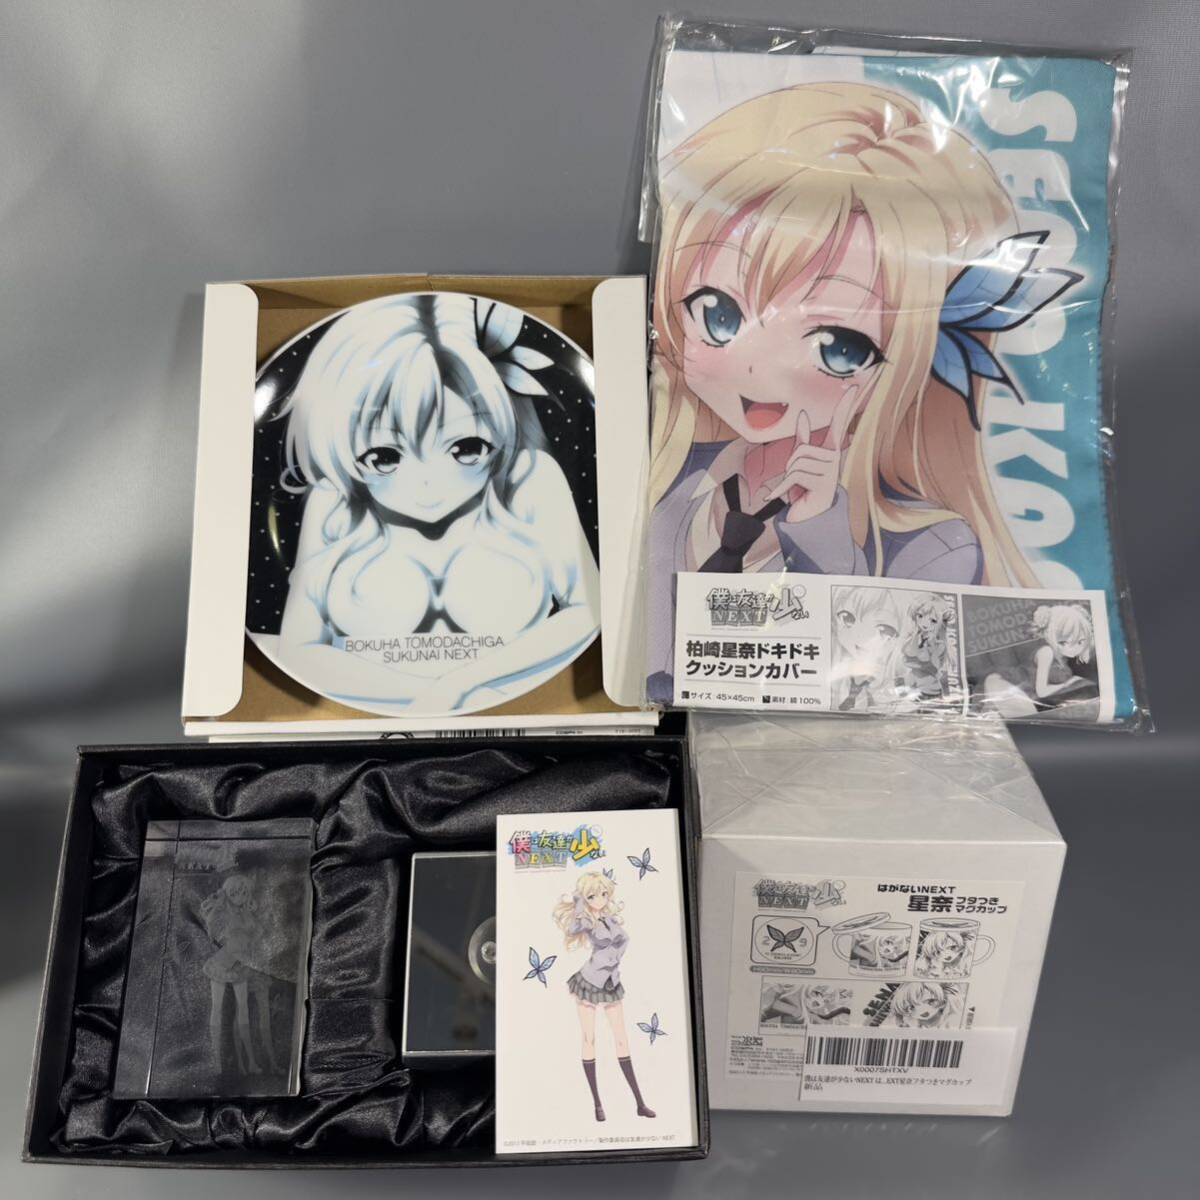  anime goods large amount together monogatari series Saber . is ... little Strike Witches Infinite Stratos other unused storage goods 